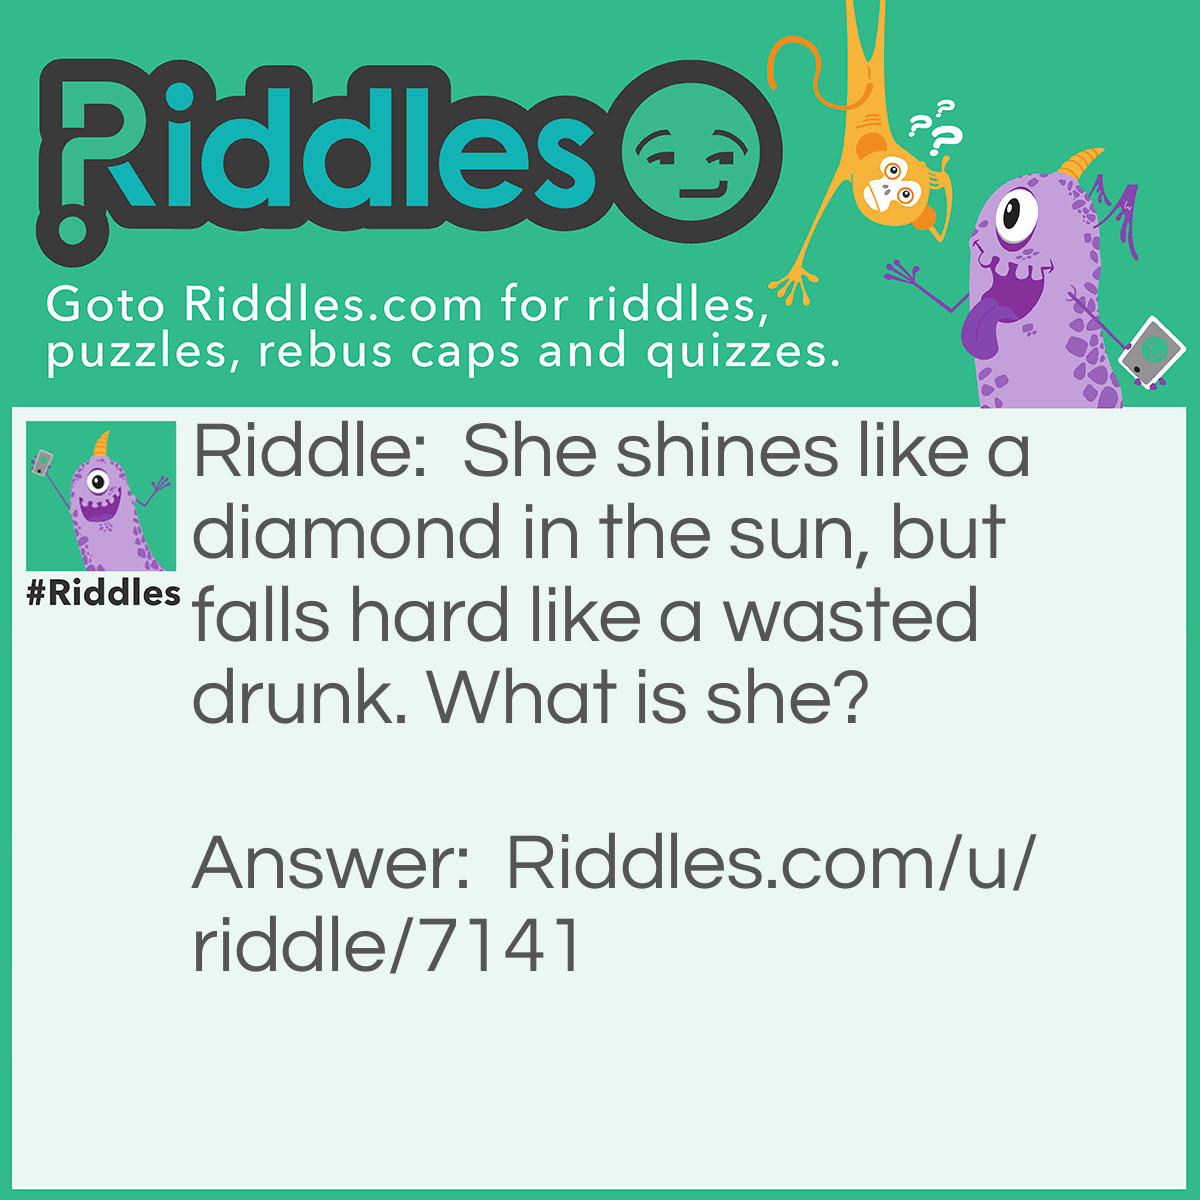 Riddle: She shines like a diamond in the sun, but falls hard like a wasted drunk. What is she? Answer: A waterfall.